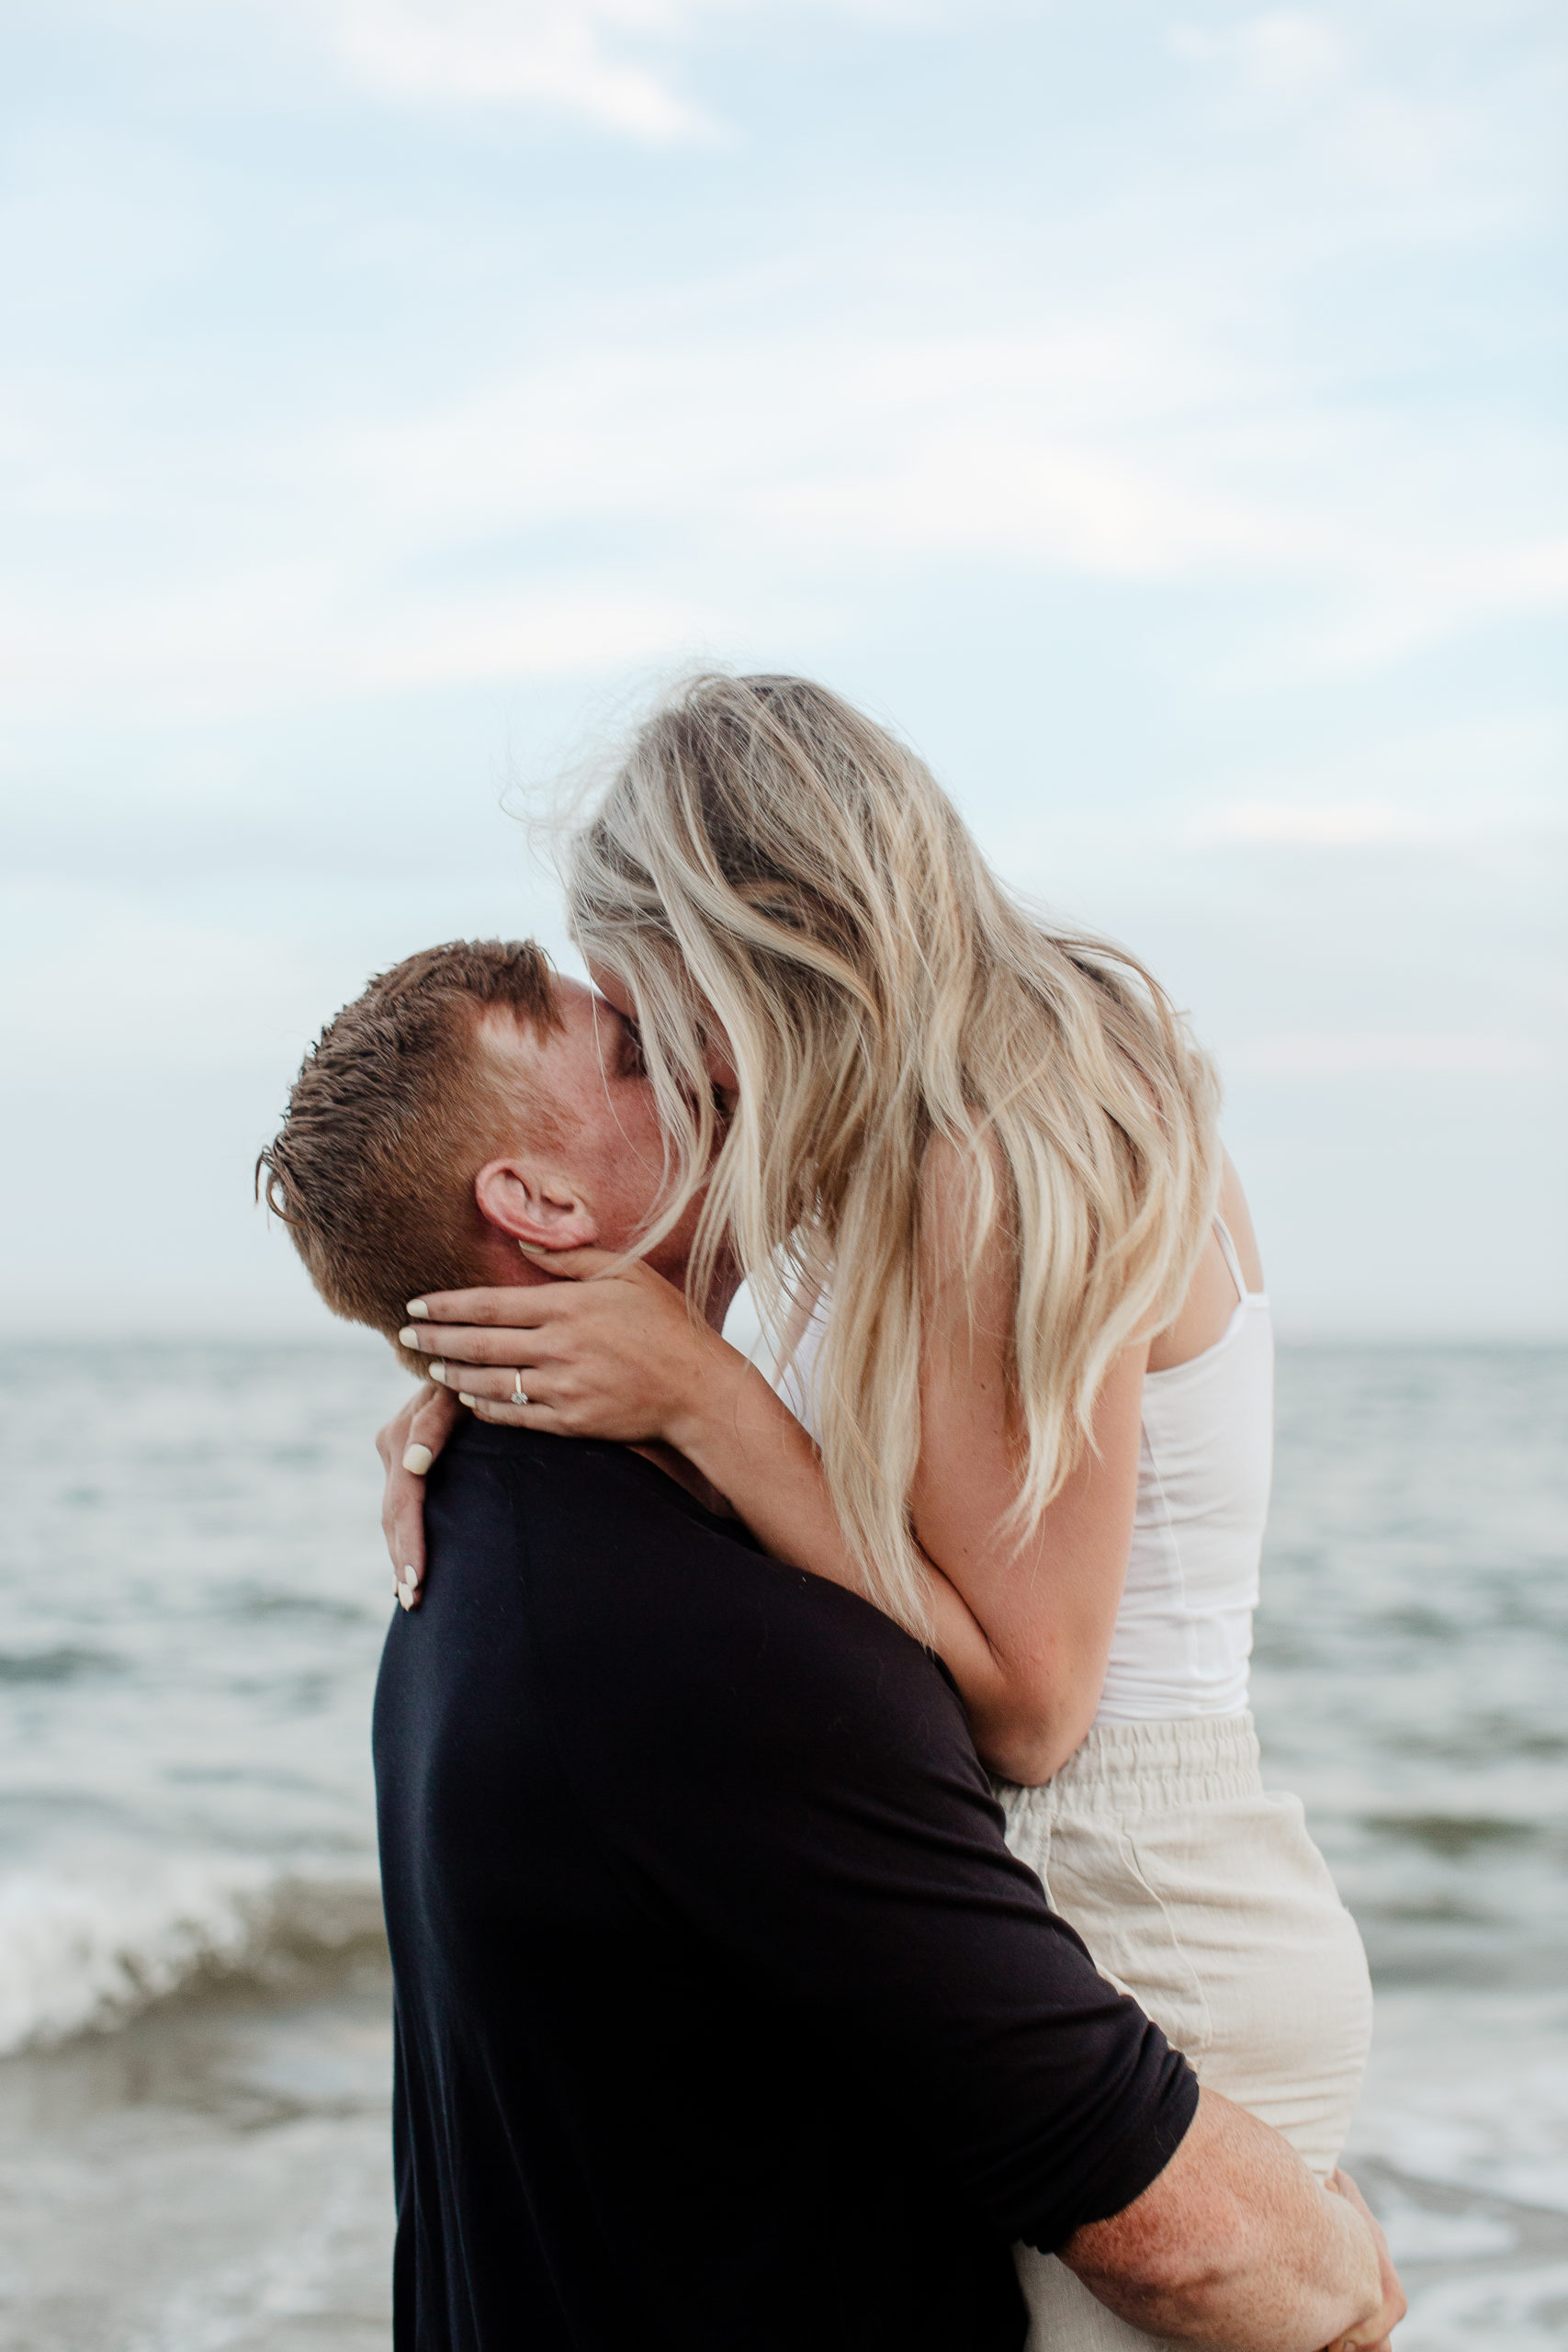 Engagement photography at beach